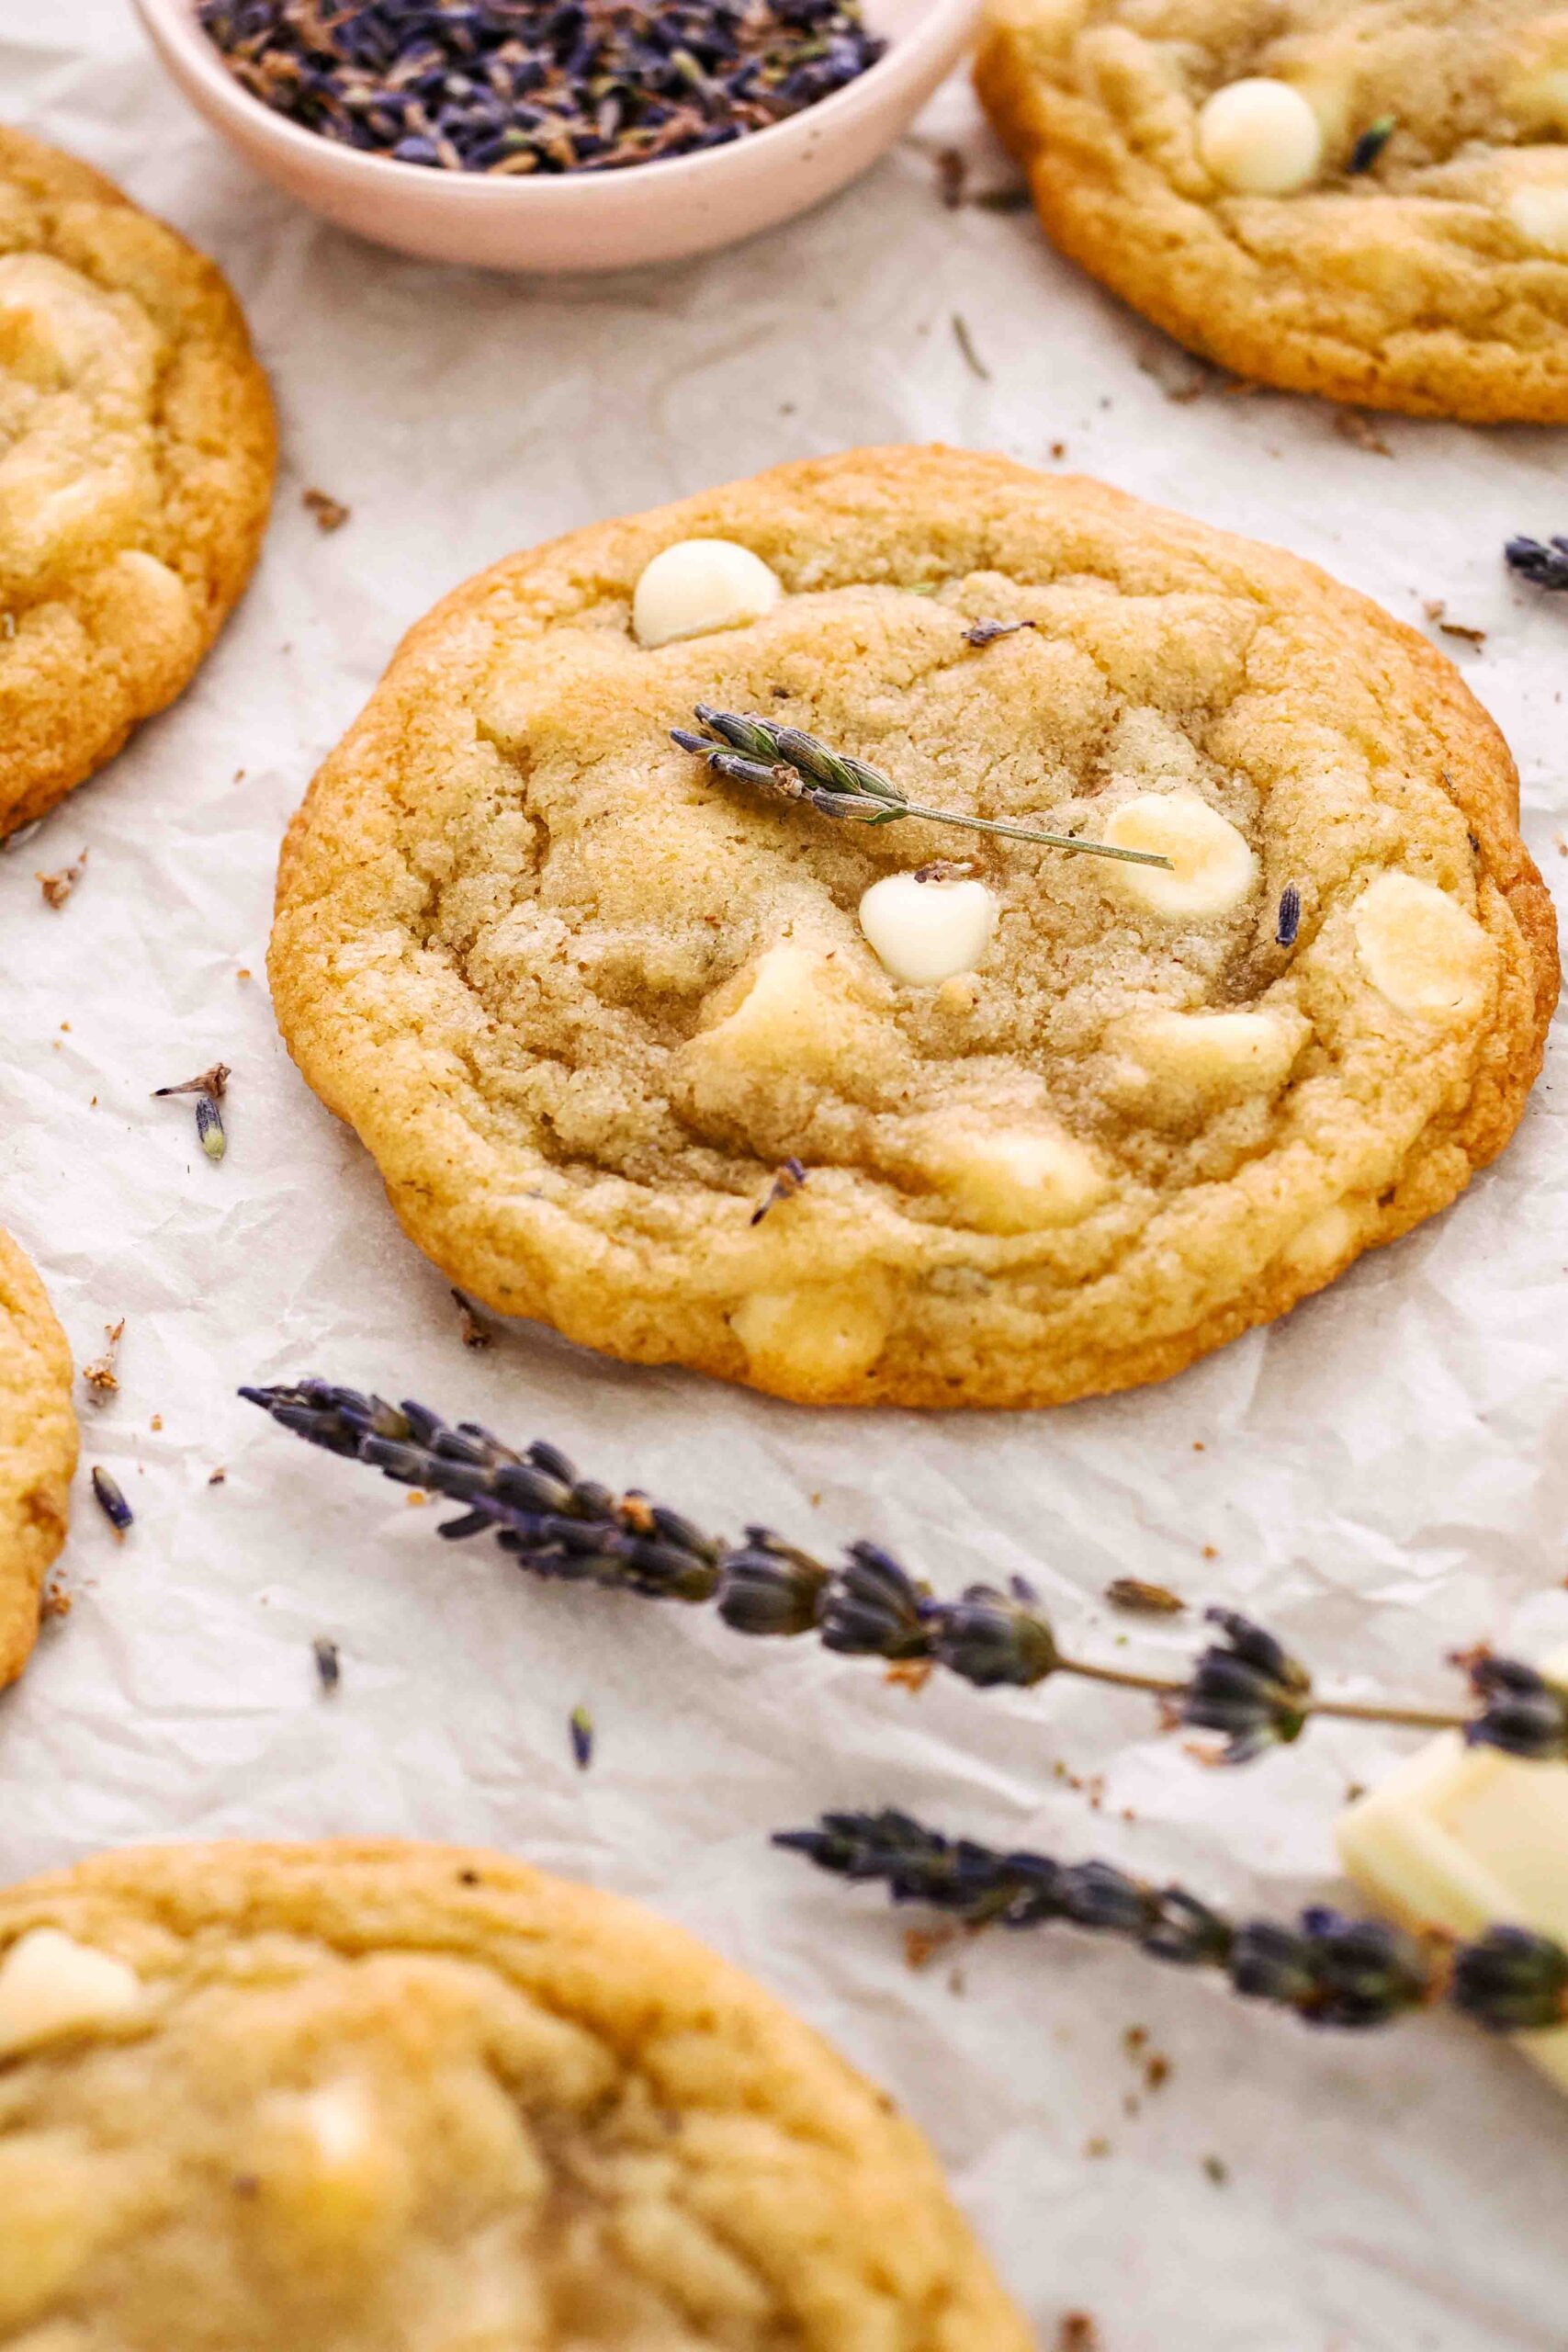 A small sprig of lavender rests on top of a lavender white chocolate chip cookie.